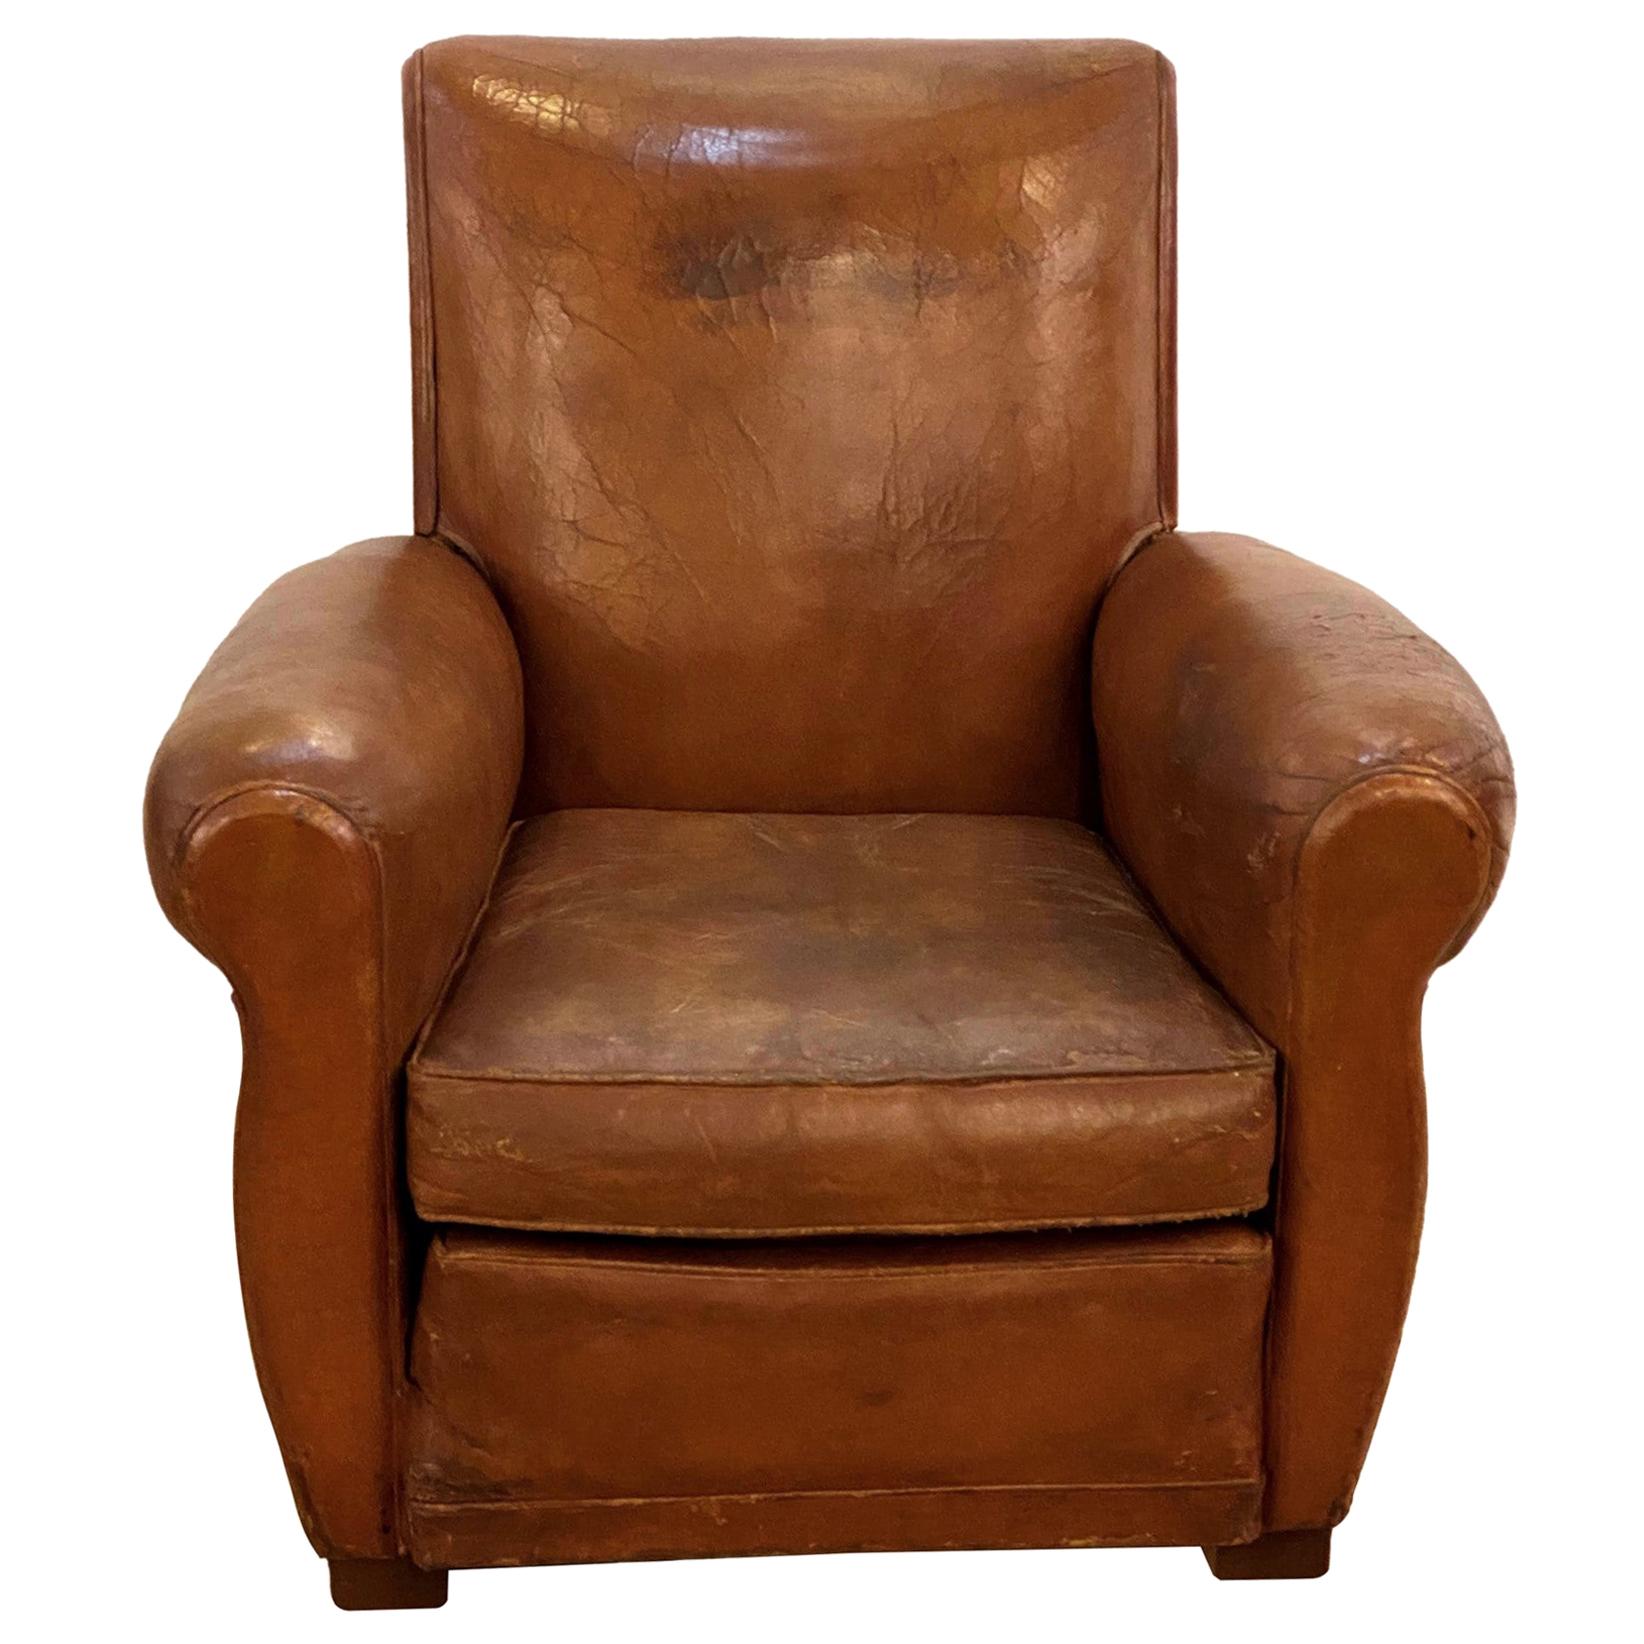 Single Vintage Art Deco French Brown Leather Club Chair